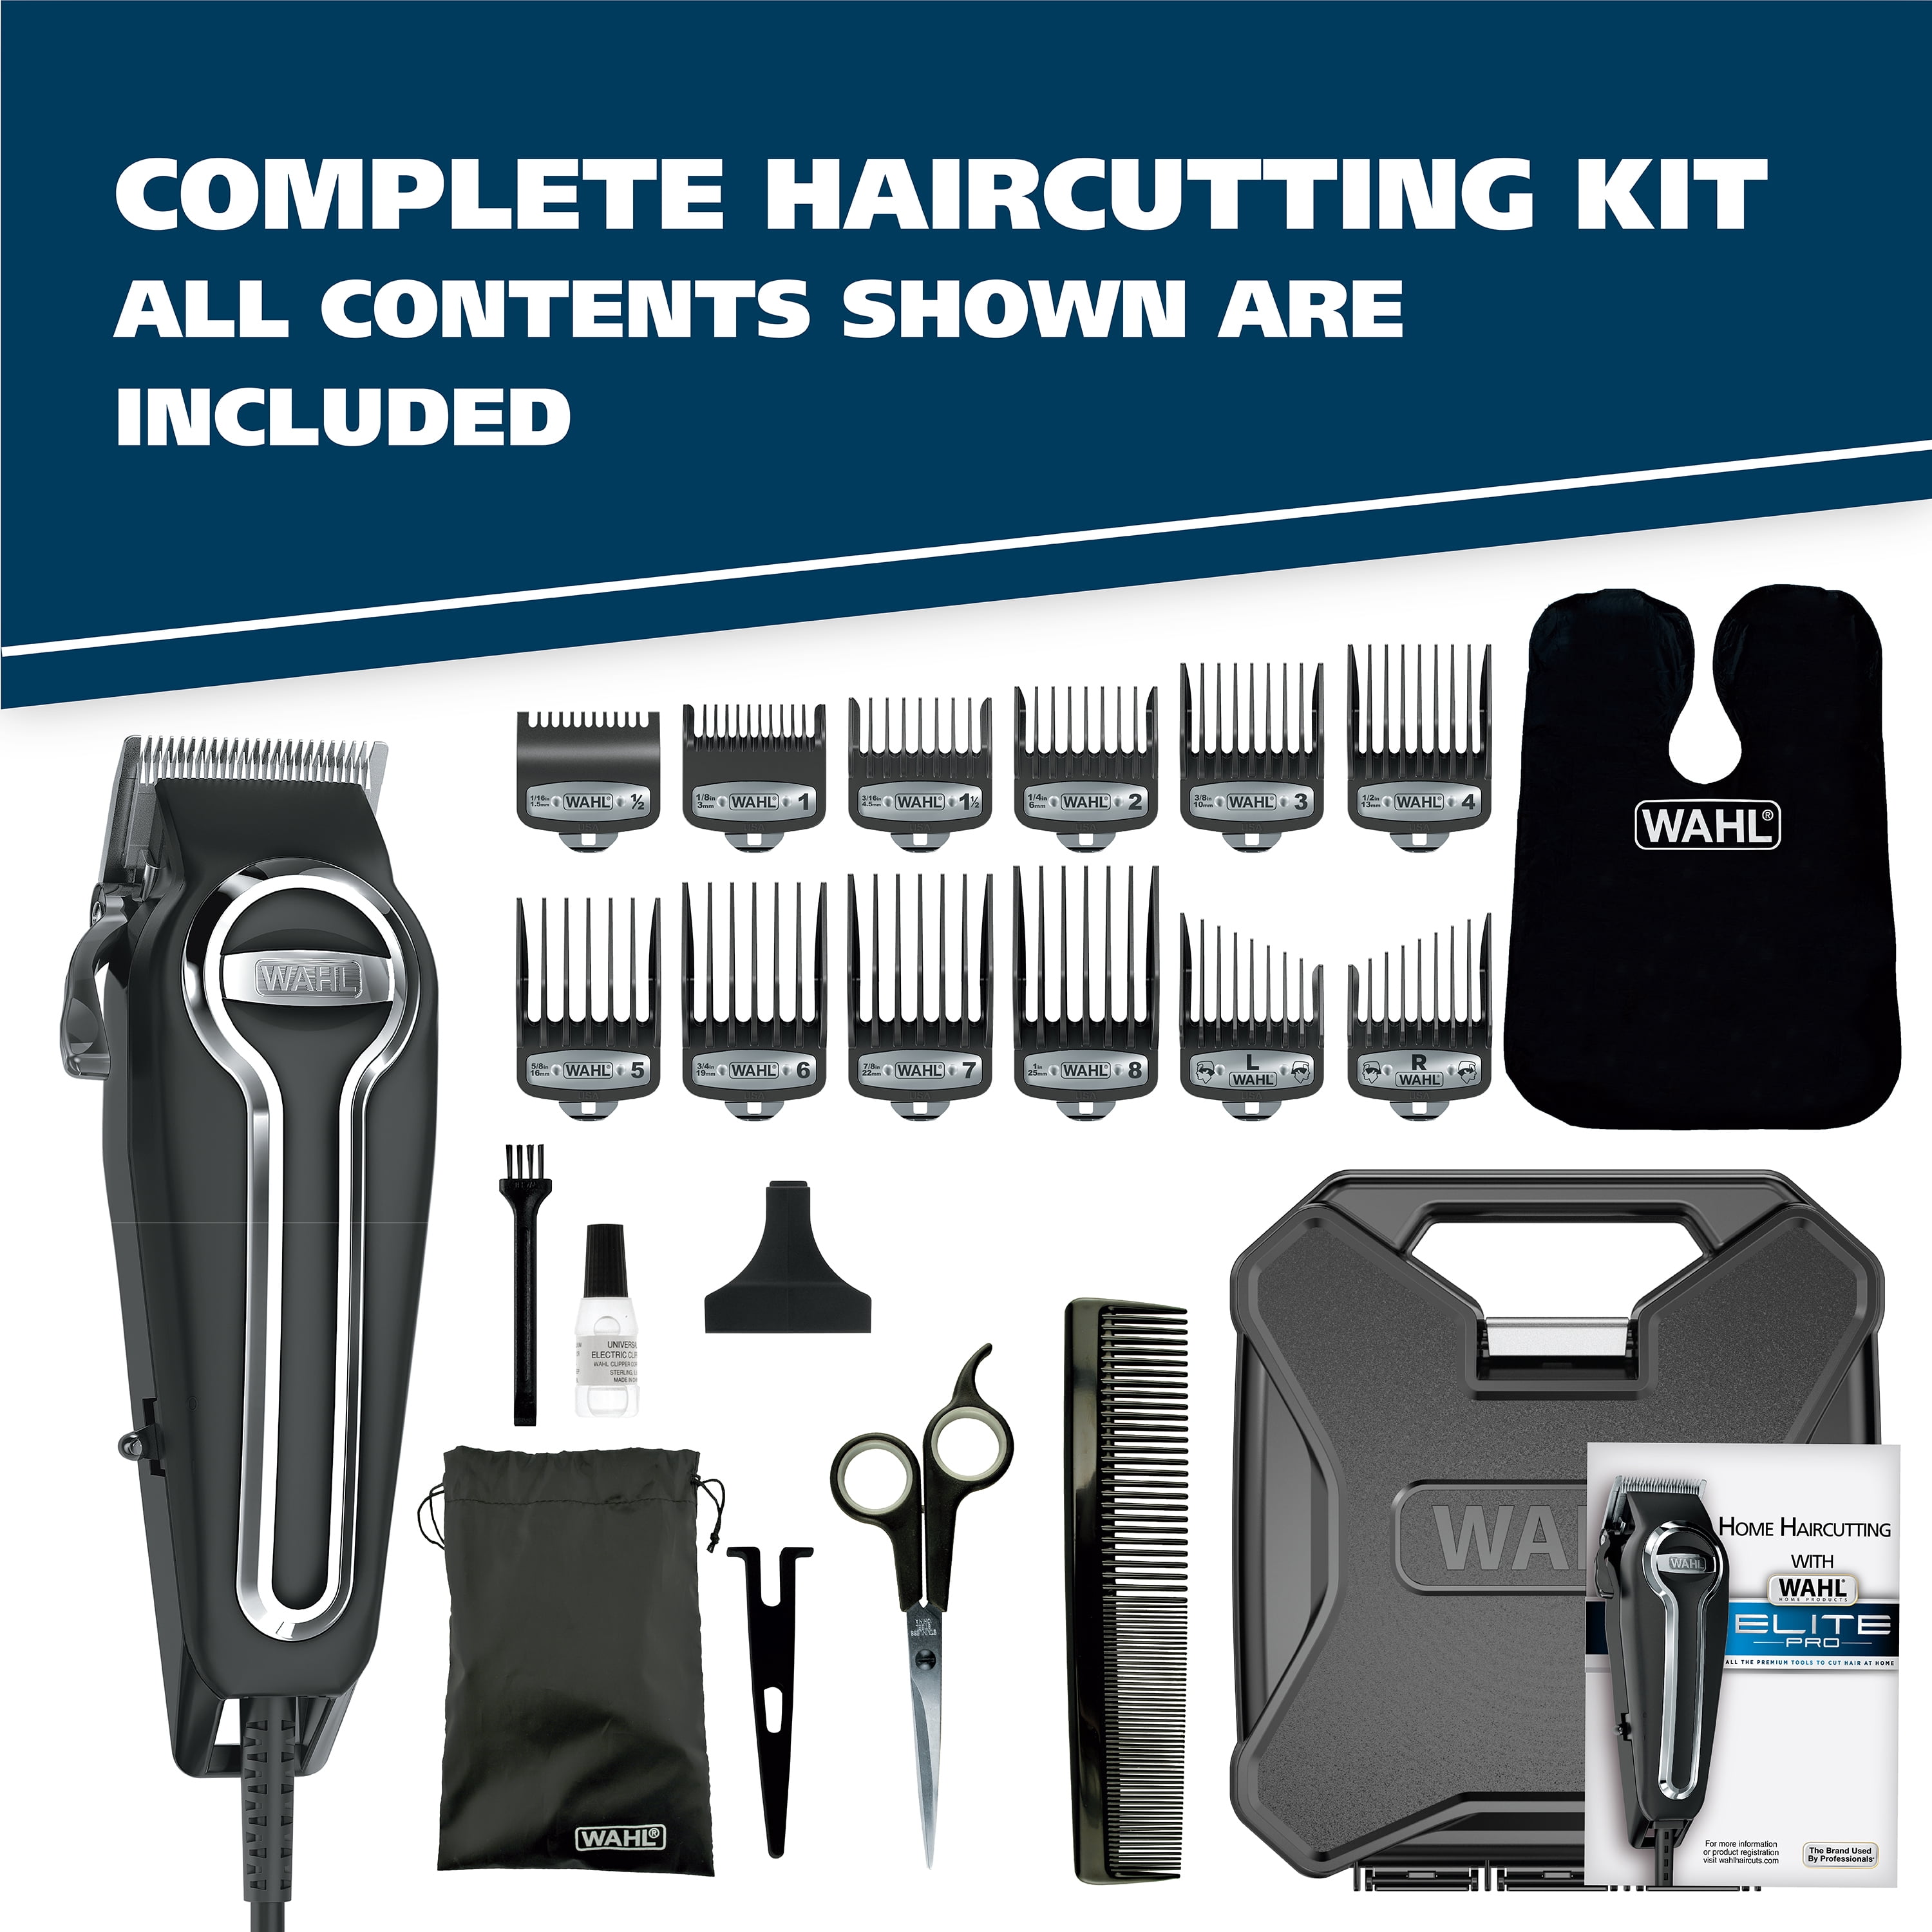 Wahl Elite Pro Complete High Performance Professional Men's Hair Cutting Kit,  21 Piece Set with Styling Shear, Comb  Clippers, 79602 - Walmart.com